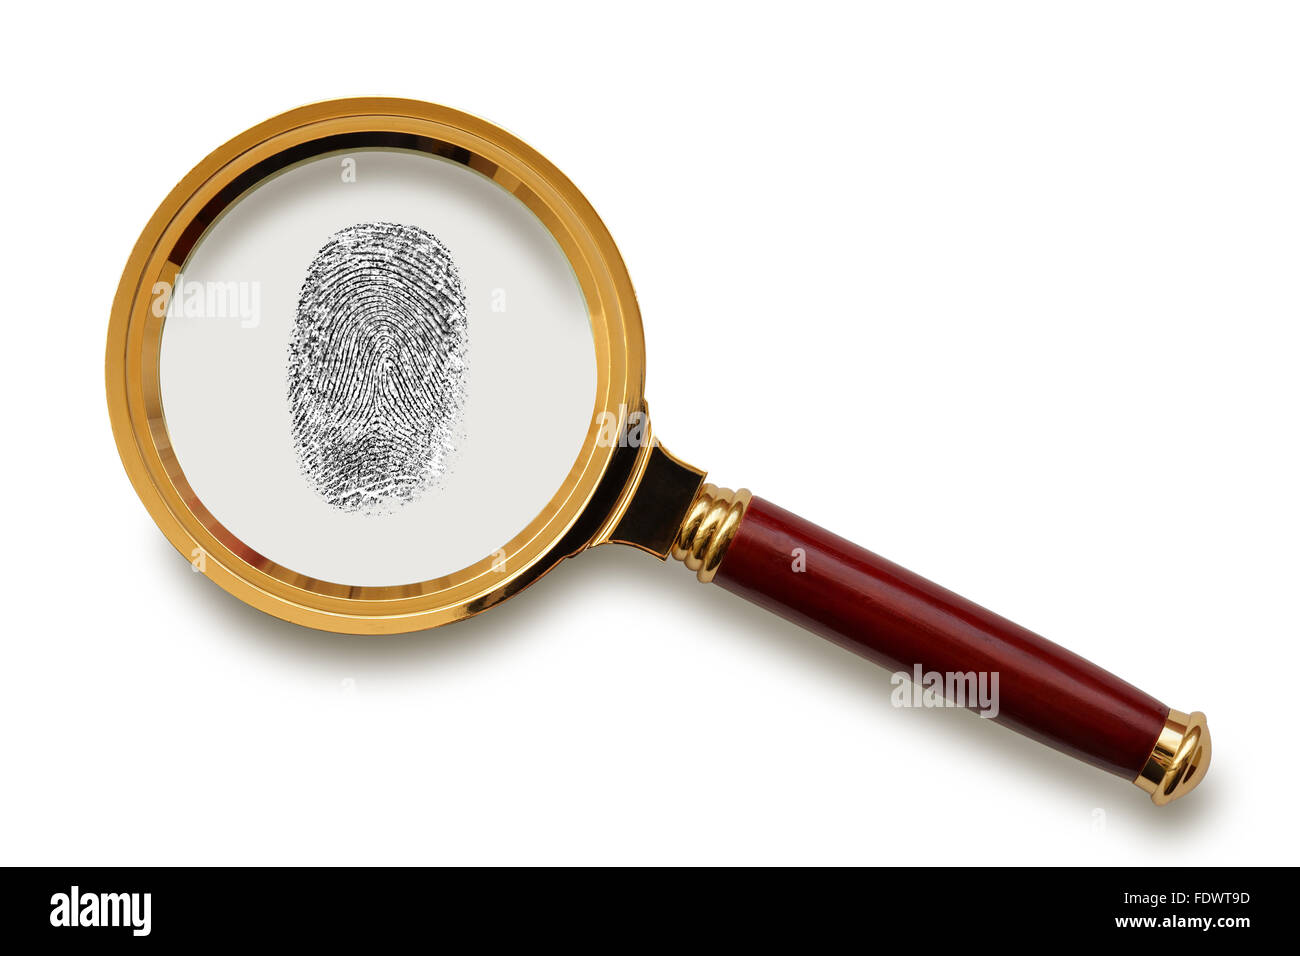 Magnifying glass with fingerprint  isolated on the white background, clipping path included. Stock Photo